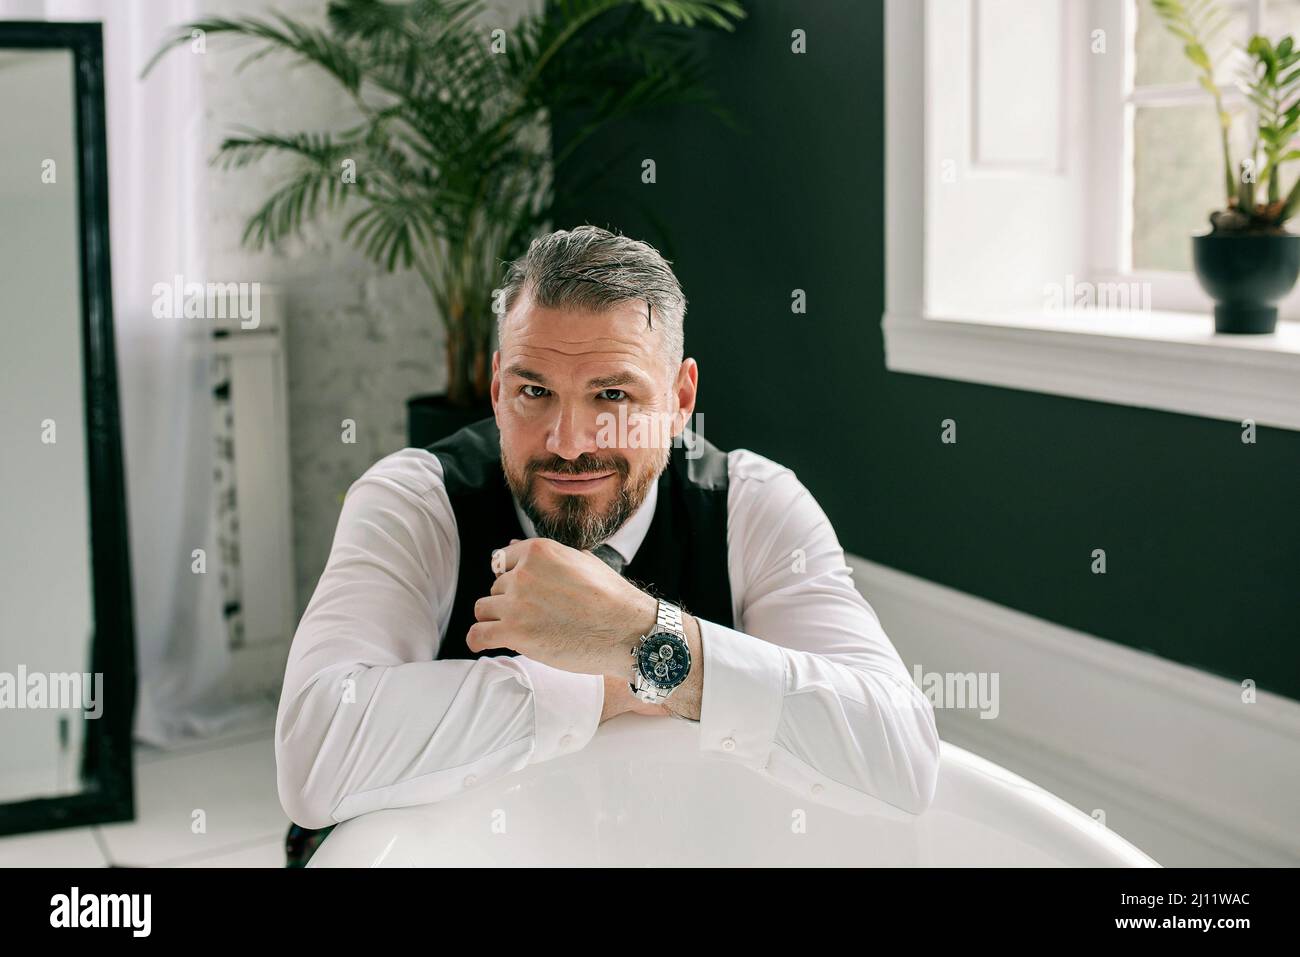 handsome mature courageous  stylish scotsman businessman in kilt and suit in bathroom. Style, work from home, fashion, lifestyle, culture, ethnic Stock Photo